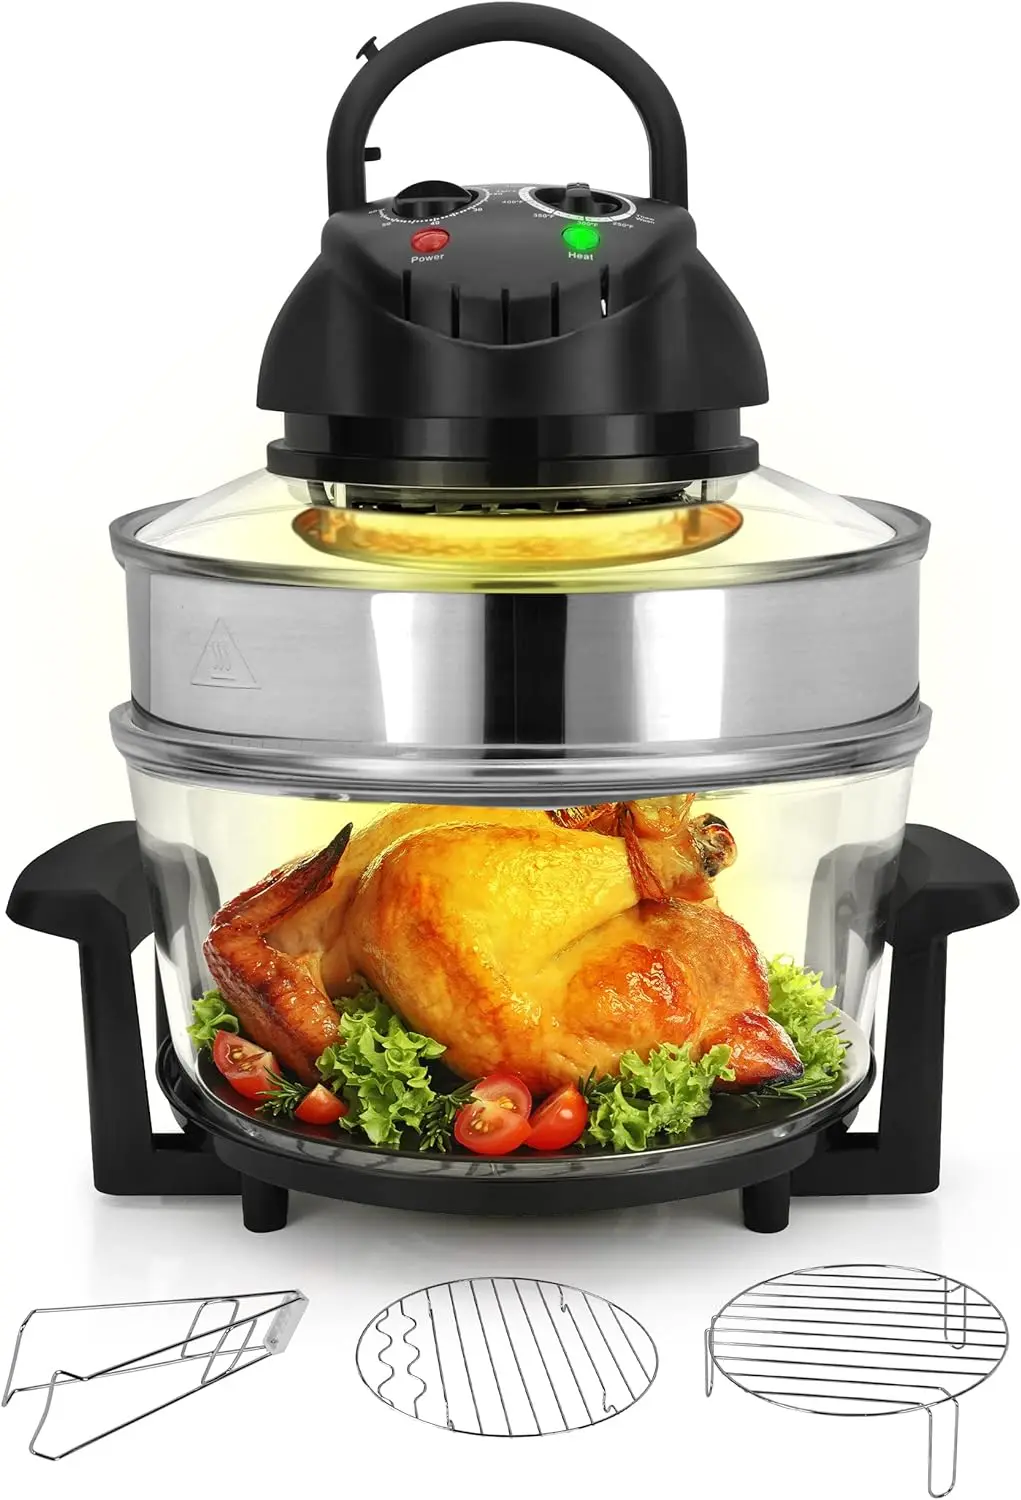 

Quart Convection Countertop Air Fryer - See through Glass for Best Cooking Results - Air Fryer, Roaster, Bake, Grill, Steam &amp